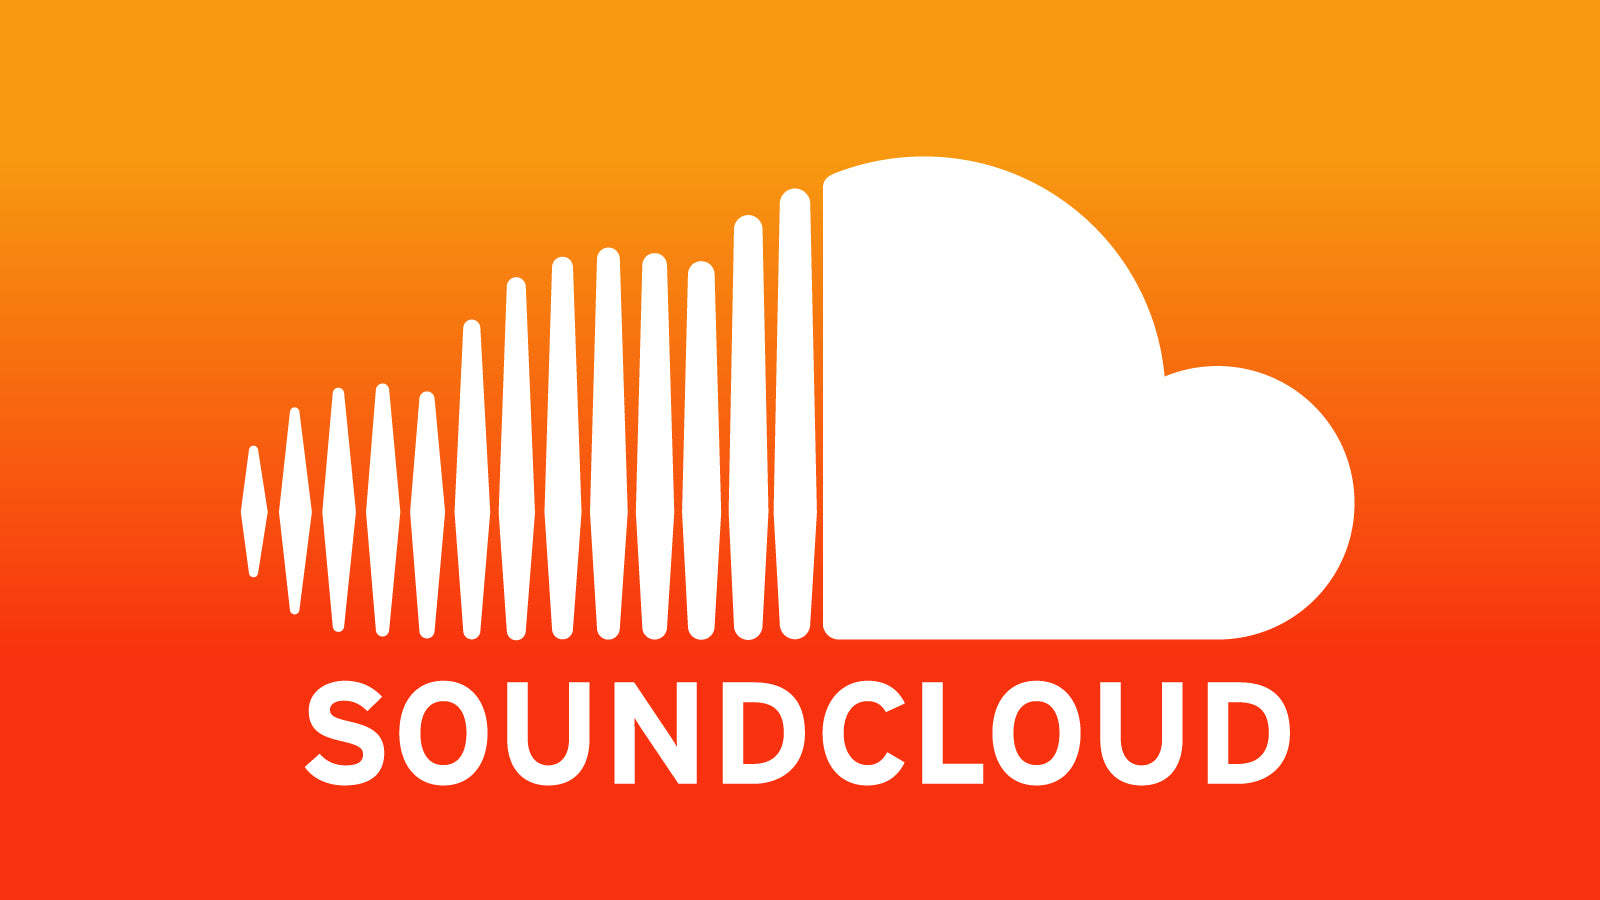 Soundcloud: The Media & Marketing Show With Hein Kaiser